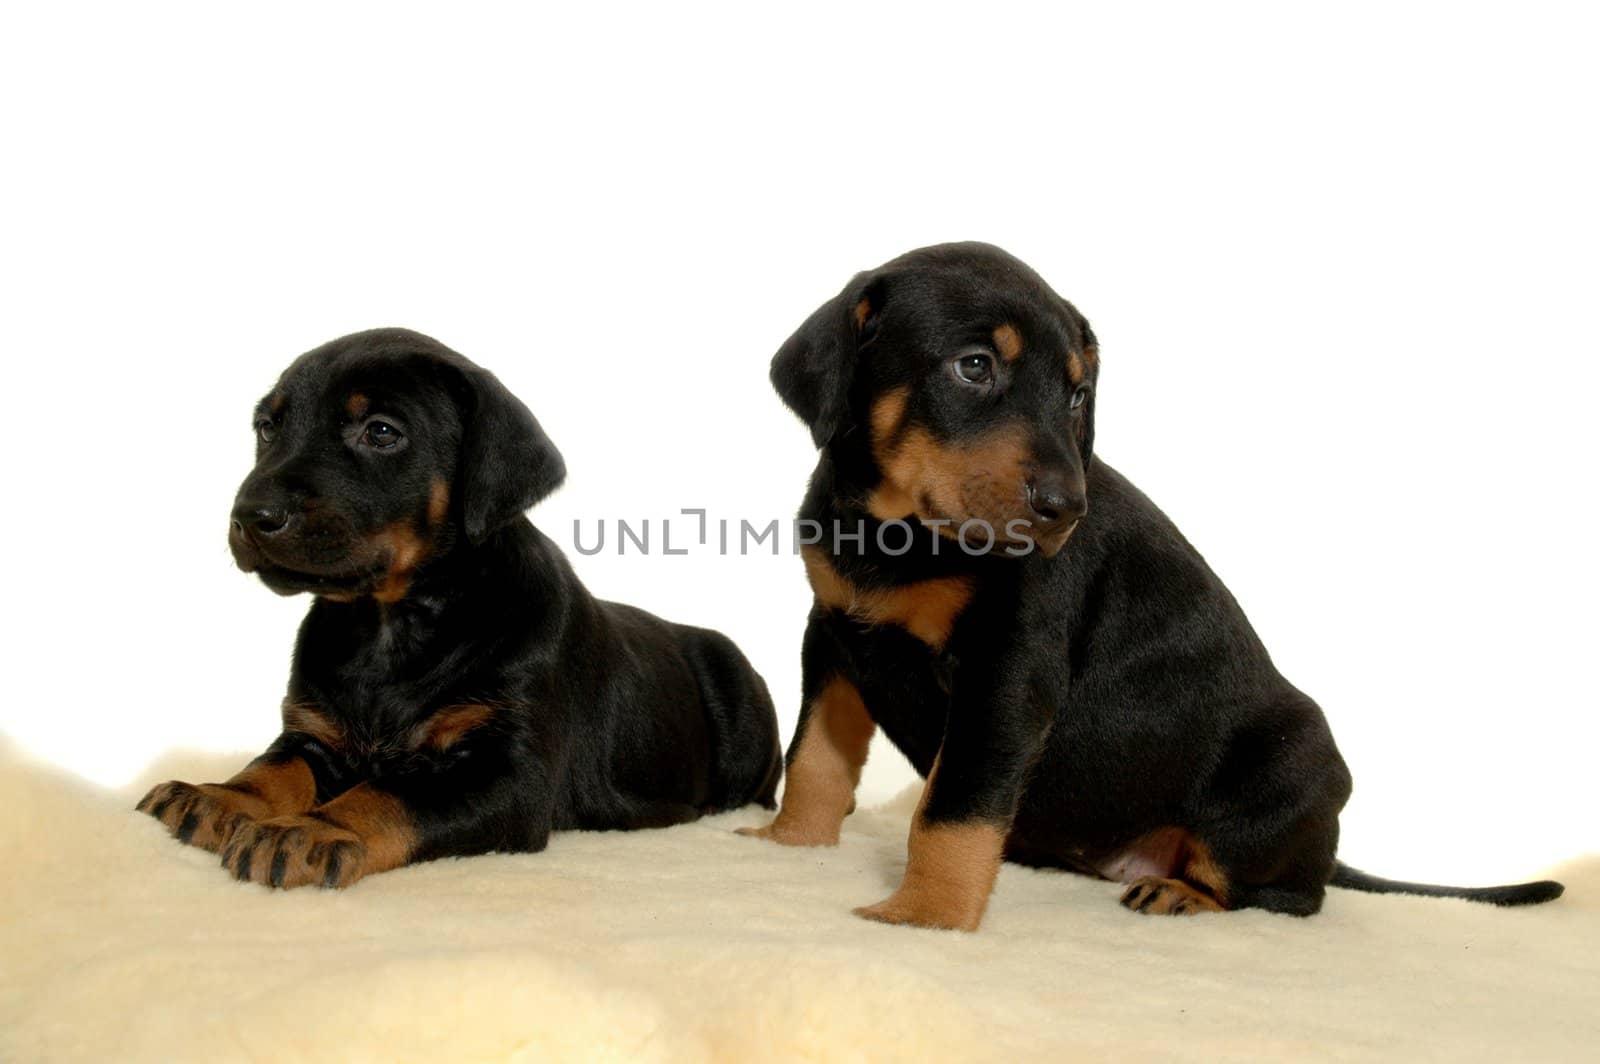 Two sweet puppies on a white background.